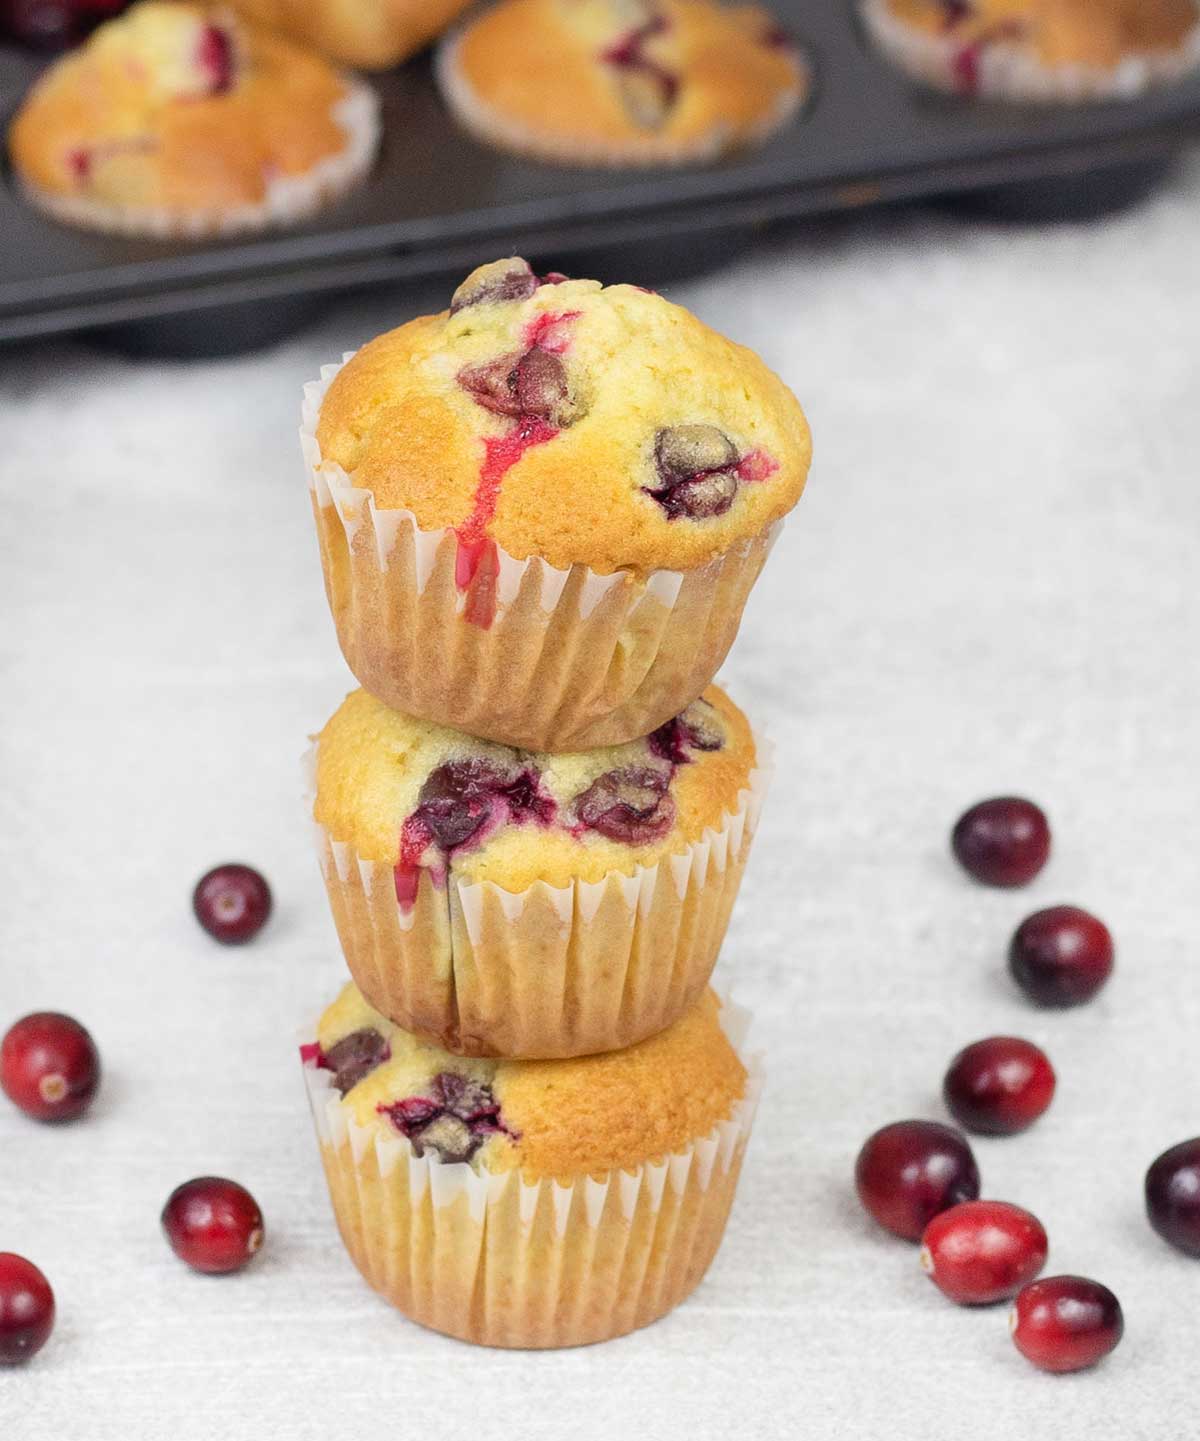 Cranberry Muffins on top of each others and some fresh Cranberries around